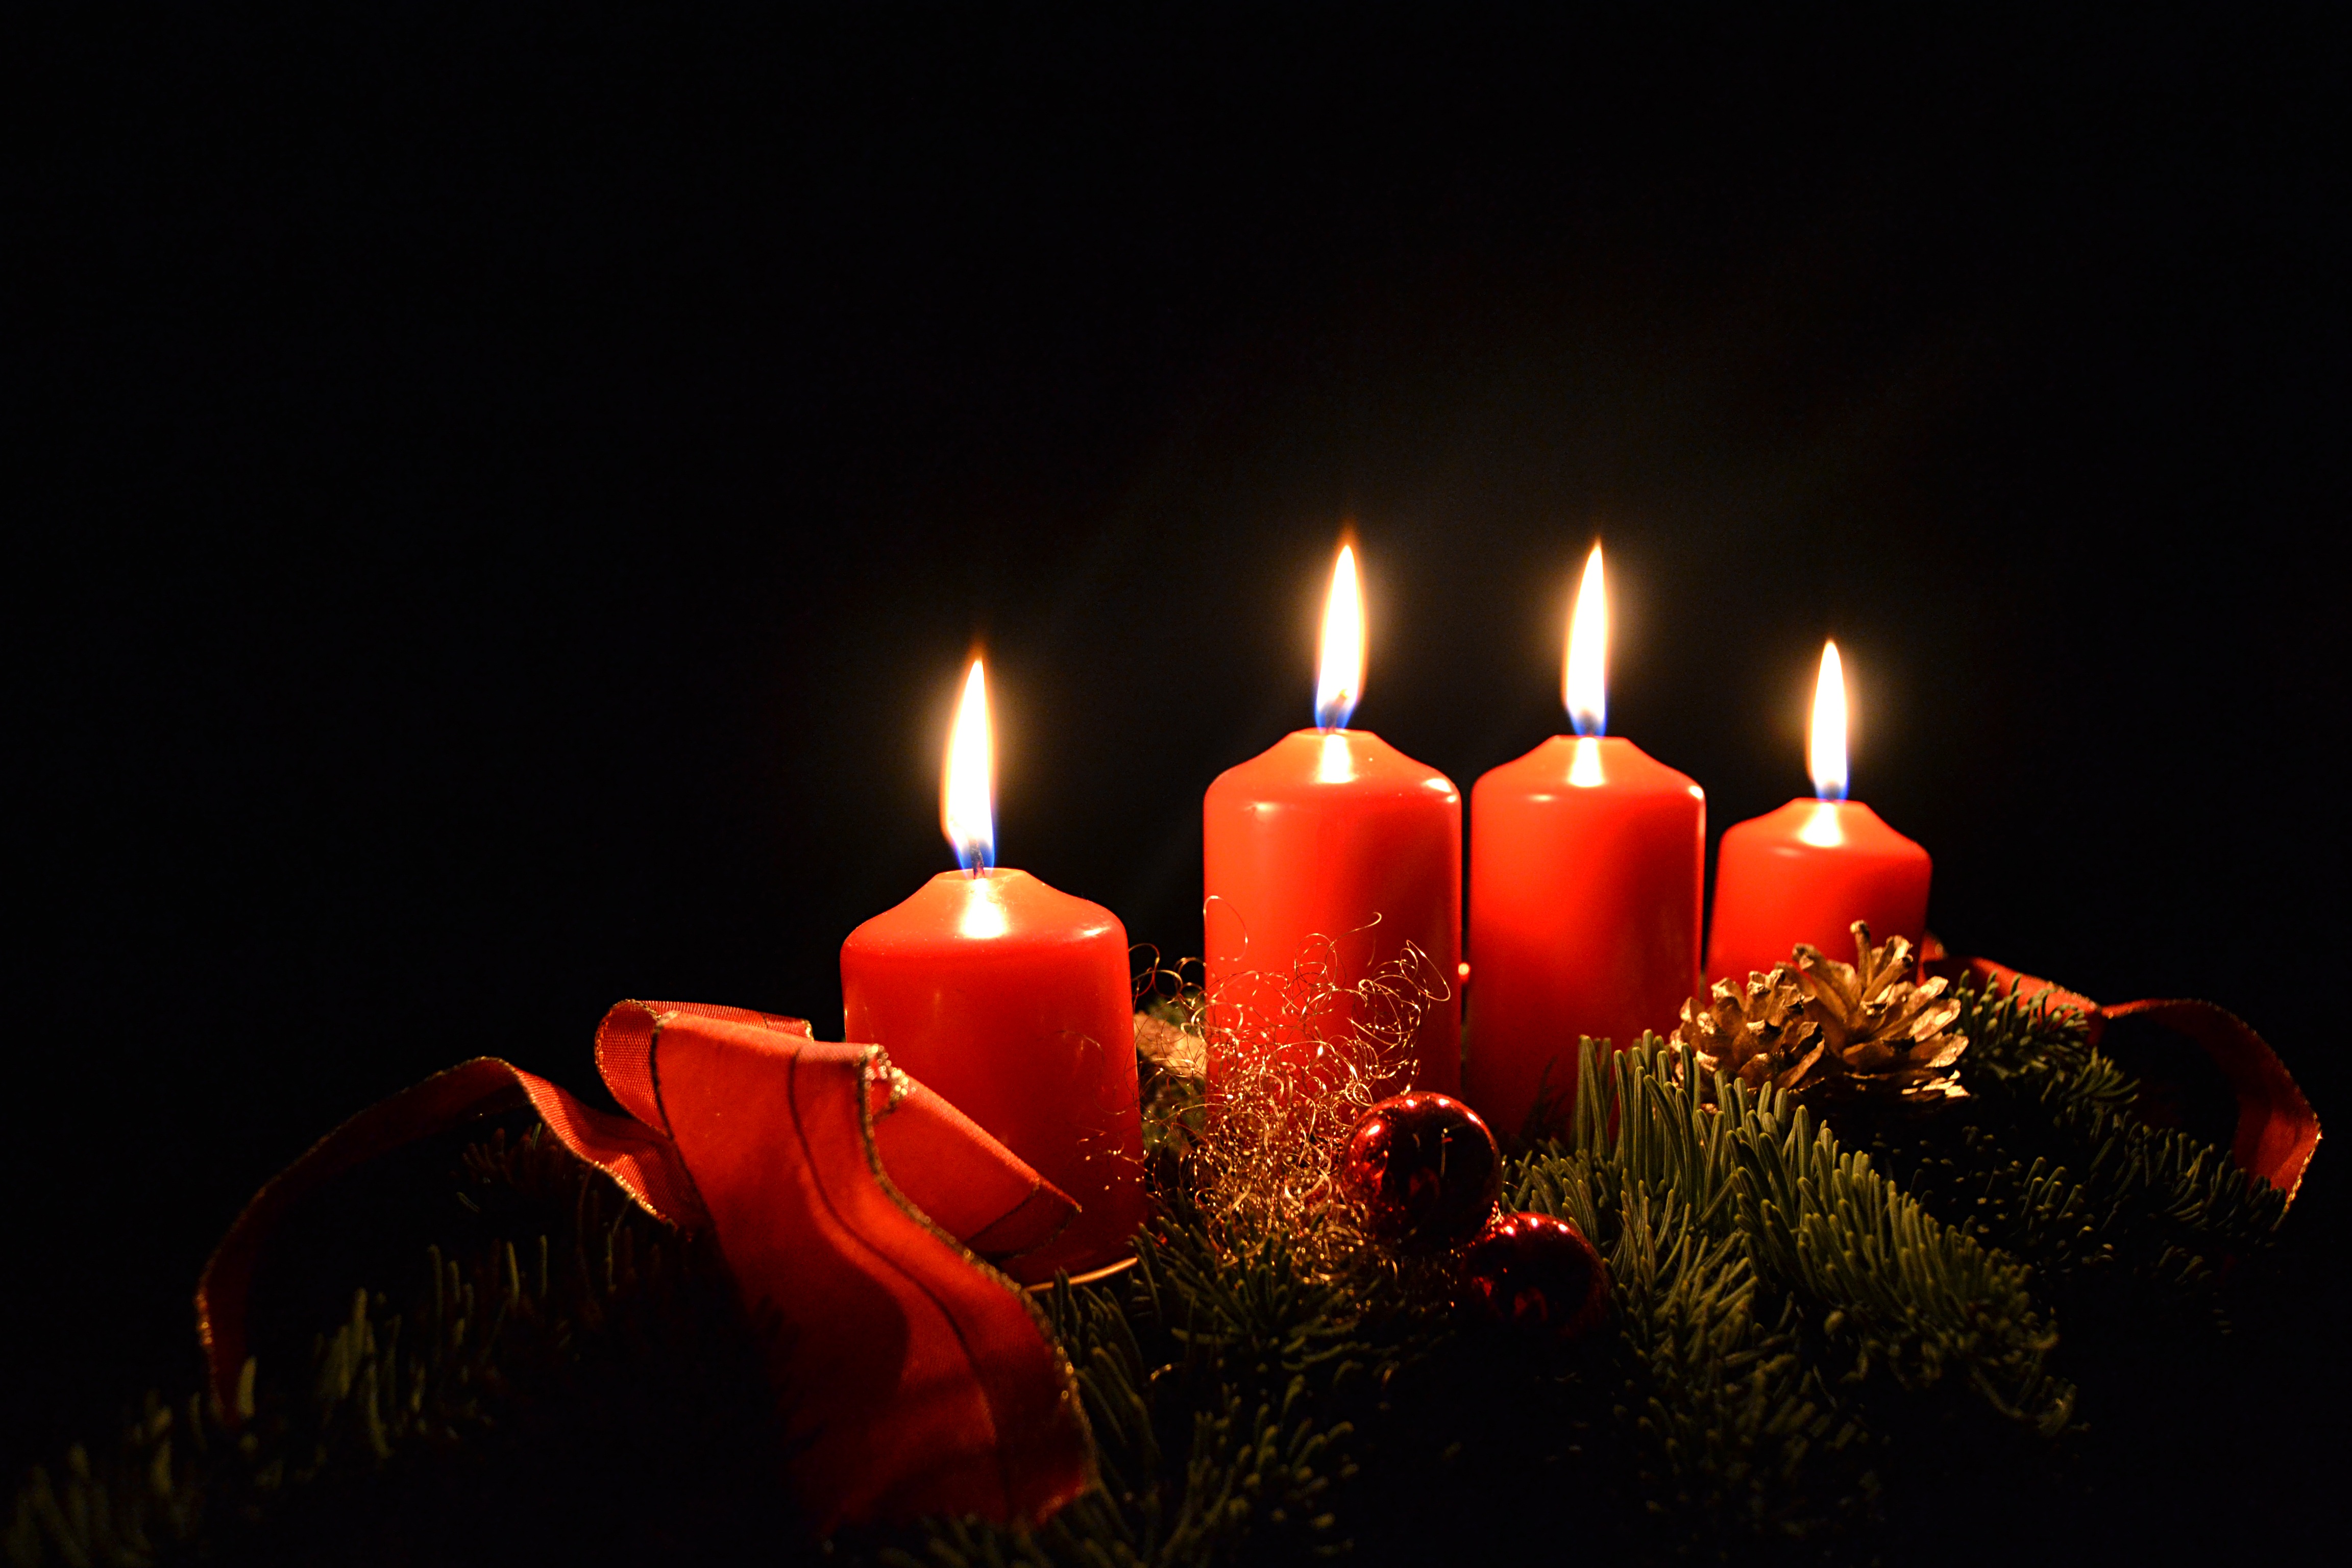 Free photo Four red lit candles on a black background on Christmas night